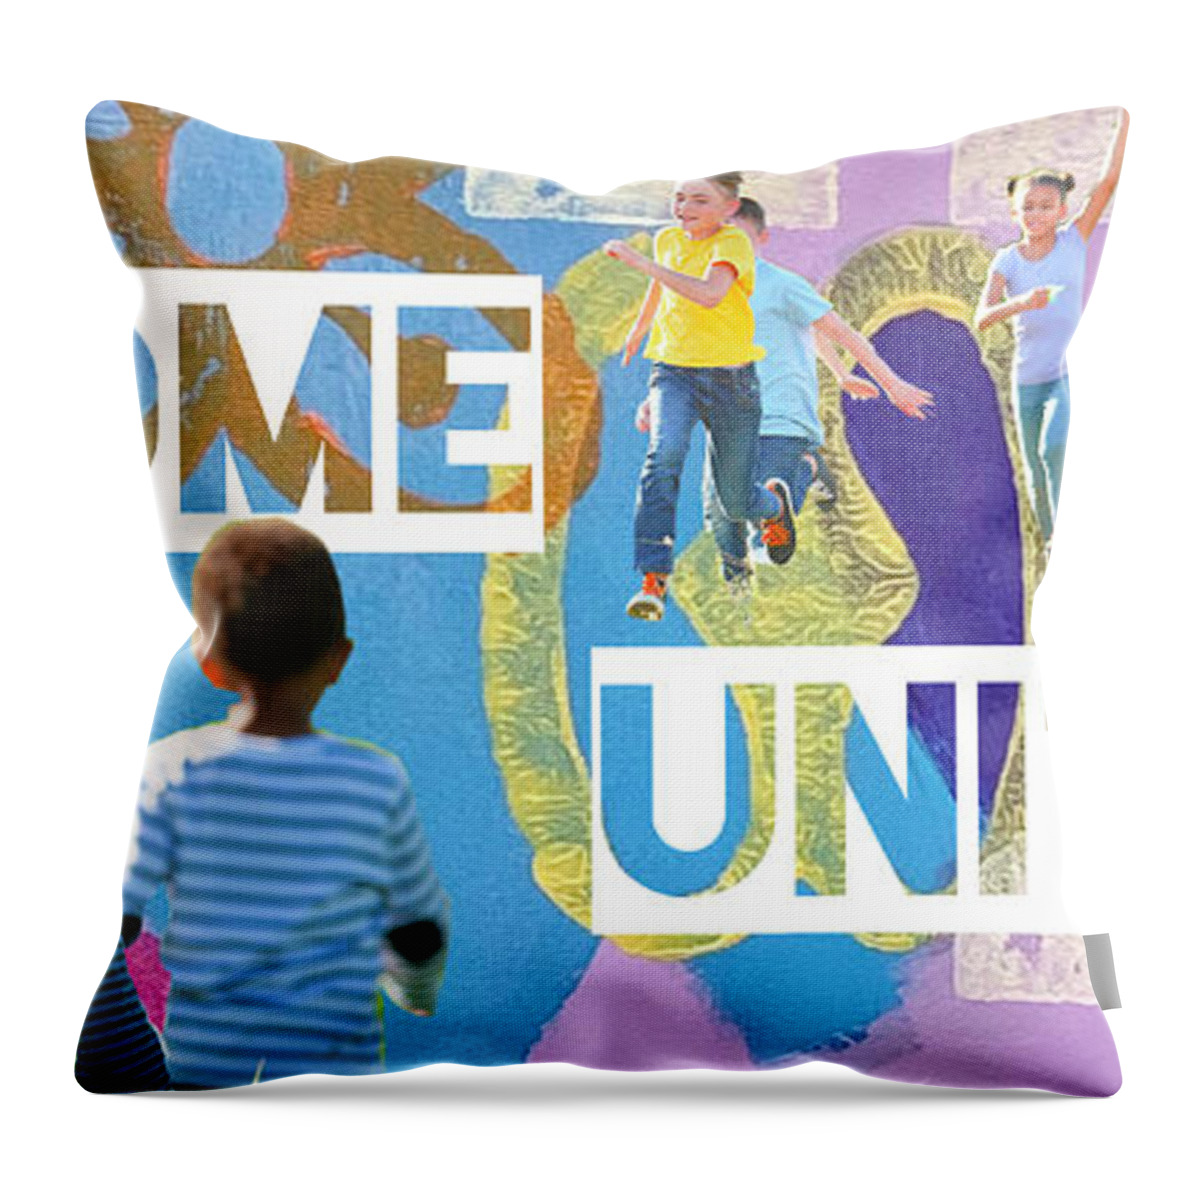  Throw Pillow featuring the painting Come unite by Clayton Singleton